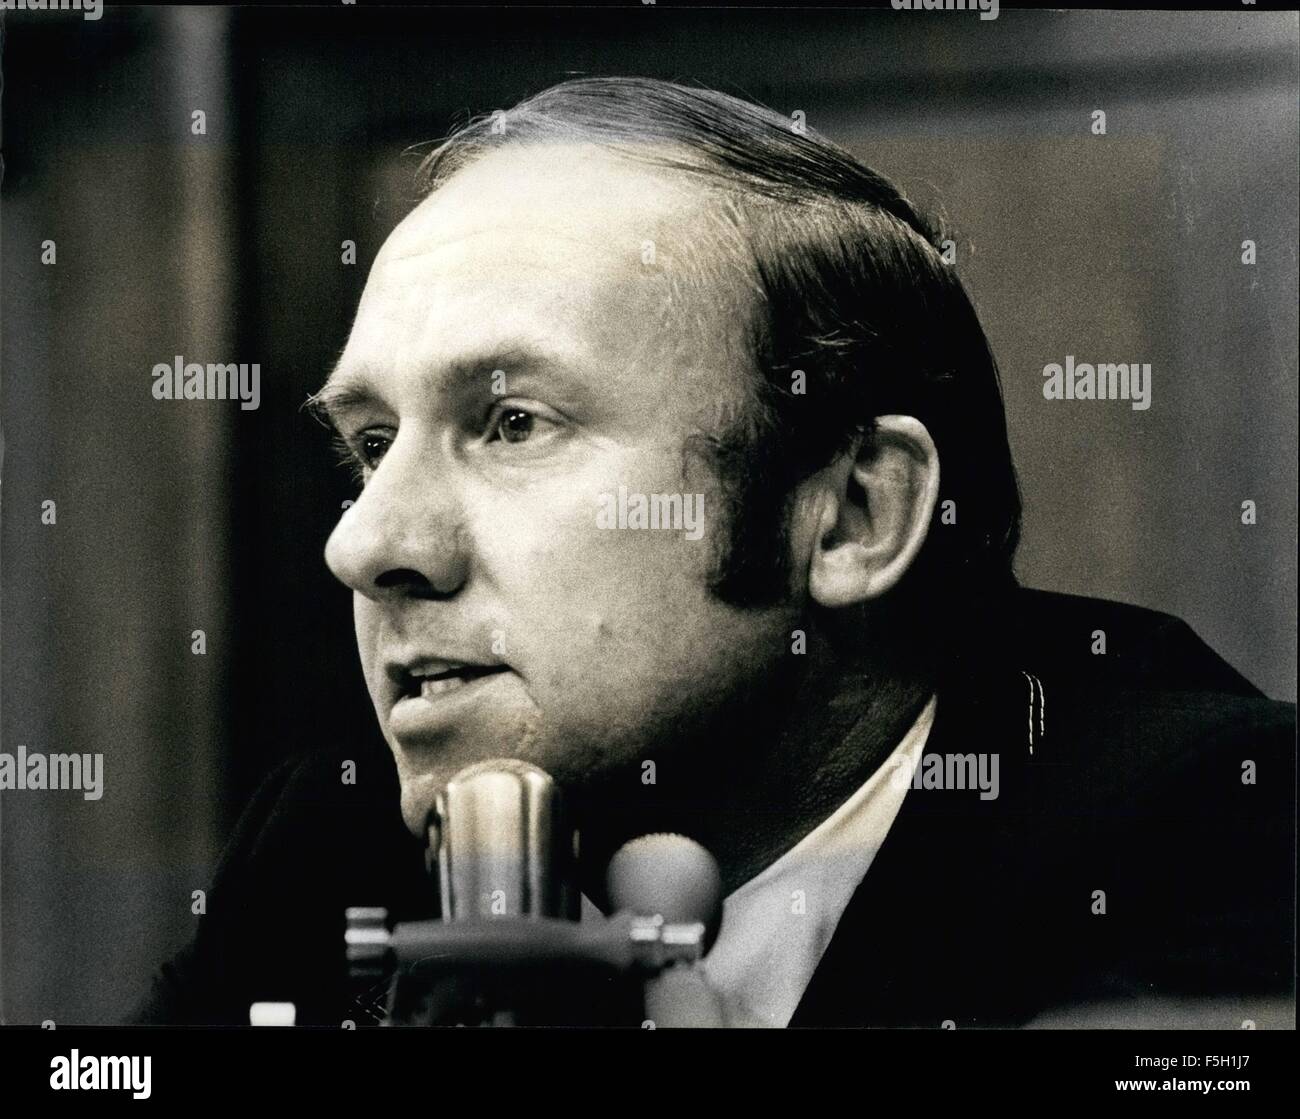 1973 - Senate Watergate Hearings - The House Judiciary Committee, July 24-26, 1974 Ã¢â‚¬' Congressman Tom Railsback (R) Illinois, speaking during the debate to impeach ex-President Richard M. Nixon. Rep. Railsback voted in favor of impeachment. © Keystone Pictures USA/ZUMAPRESS.com/Alamy Live News Stock Photo